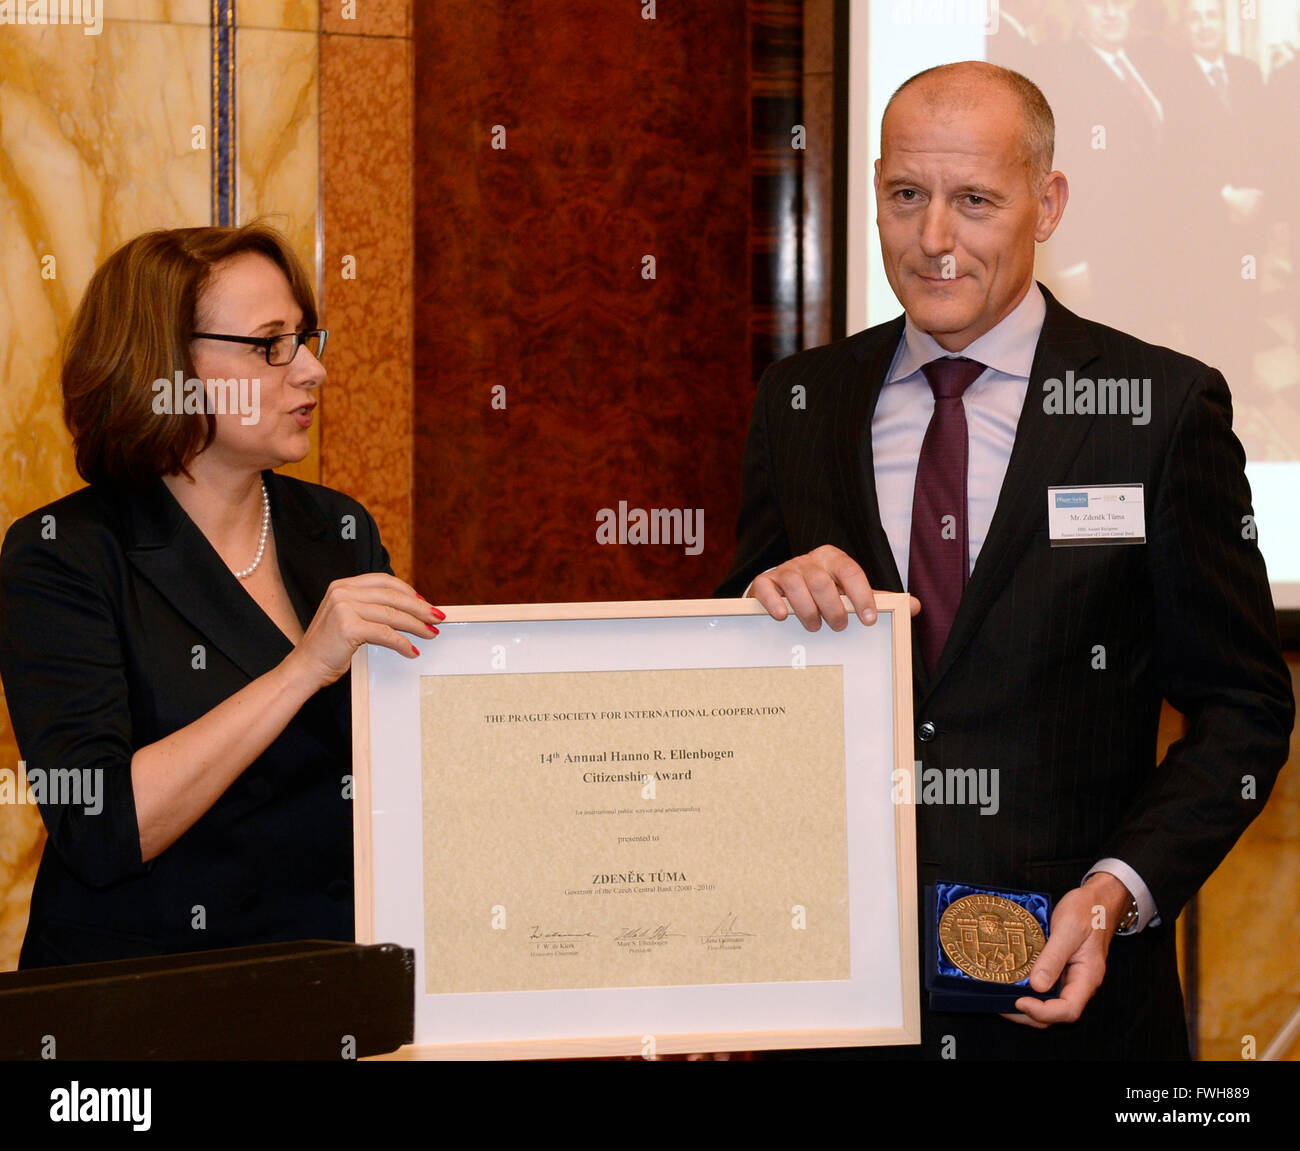 Prague, Czech Republic. 5th April, 2016. Former CNB Czech central bank governor Zdenek Tuma, right, received, from the hands of Mayor of Prague Adriana Krnacova, the Hanno R. Ellenbogen Award for his contribution to civic society in Prague today, on Tuesday, April 5, 2016. The award has been bestowed by the Prague Society for International Cooperation on the personalities who significantly helped develop civic society for the 14th time in a row this year. The Prague Society for International Cooperation was established in 1999 Credit:  CTK/Alamy Live News Stock Photo